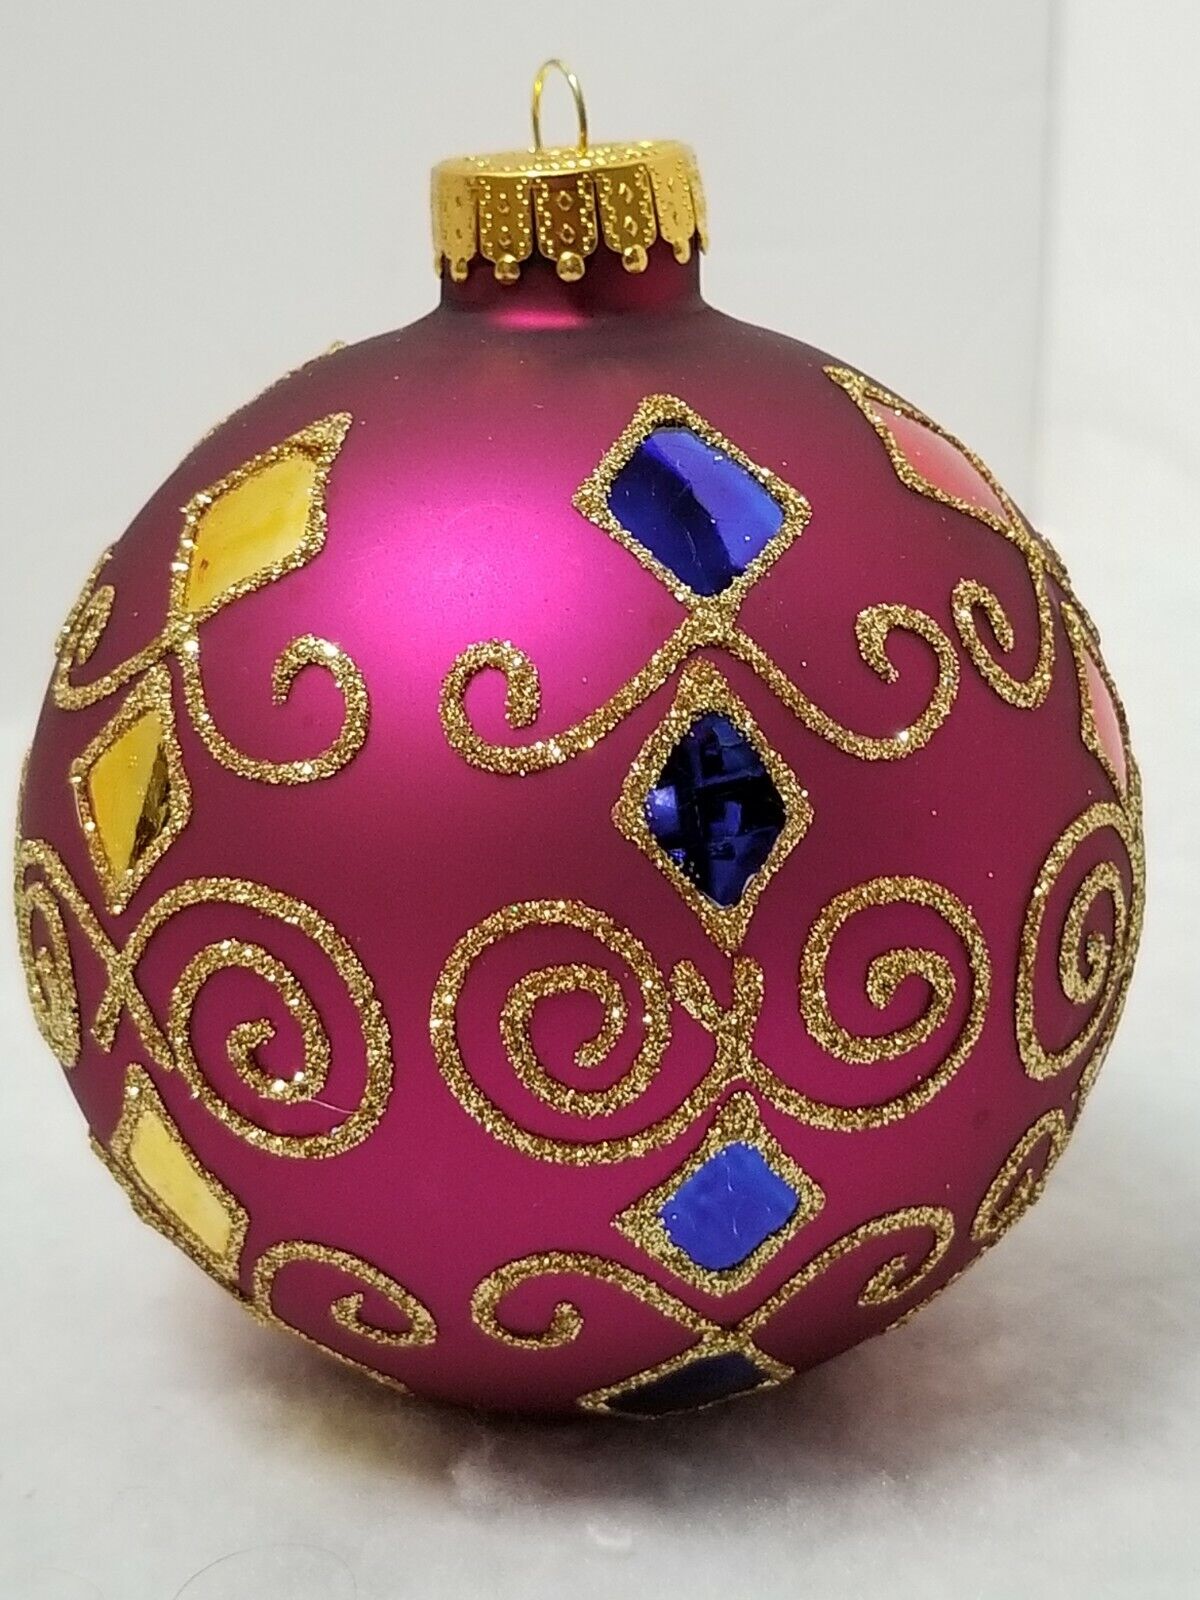 UNIQUE TREASURES COLLECTION LIMITED SERIES HAND CRAFTED ROUND GLASS ORNAMENT 